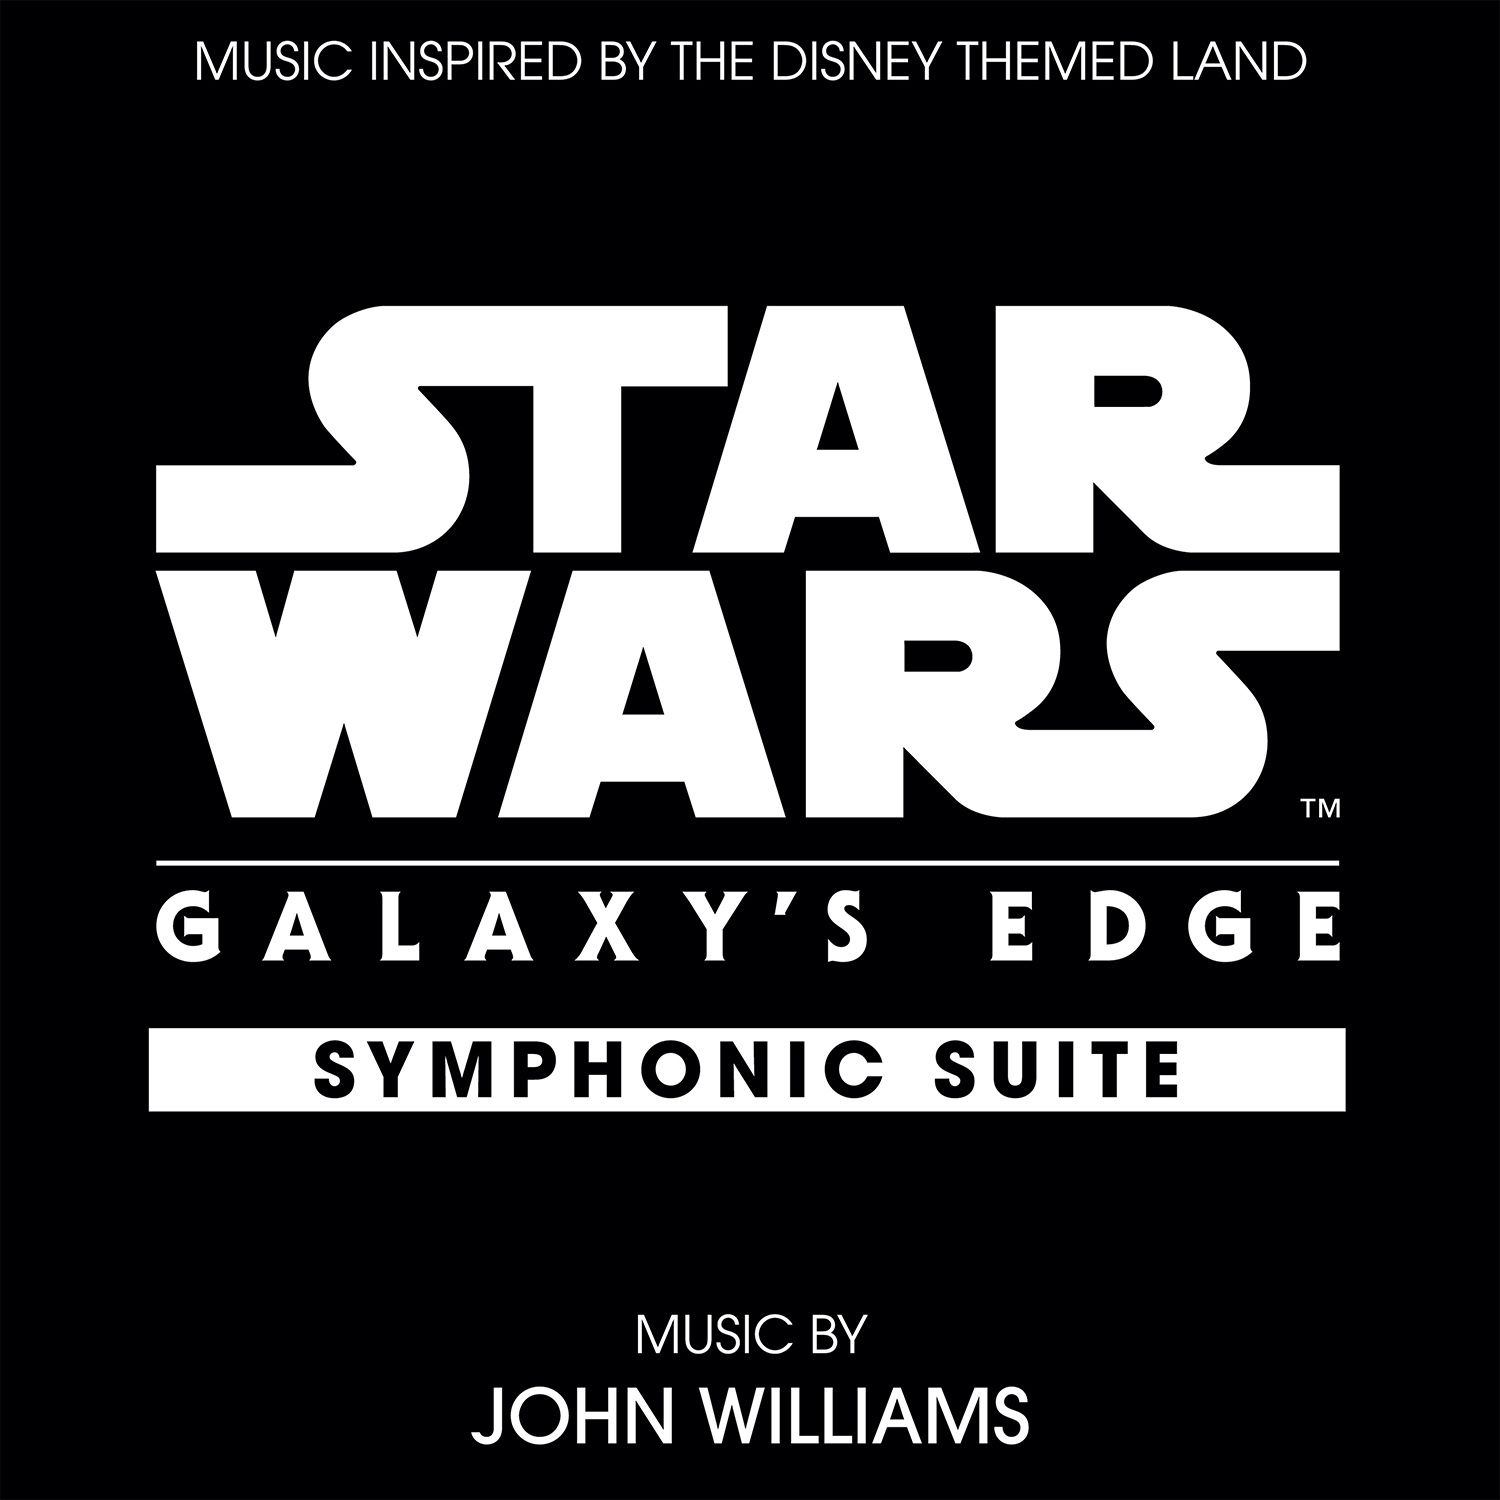 John Williams score for Star Wars: Galaxy's Edge will be one of the many immersive elements that will transport guests into the world of Star Wars! 